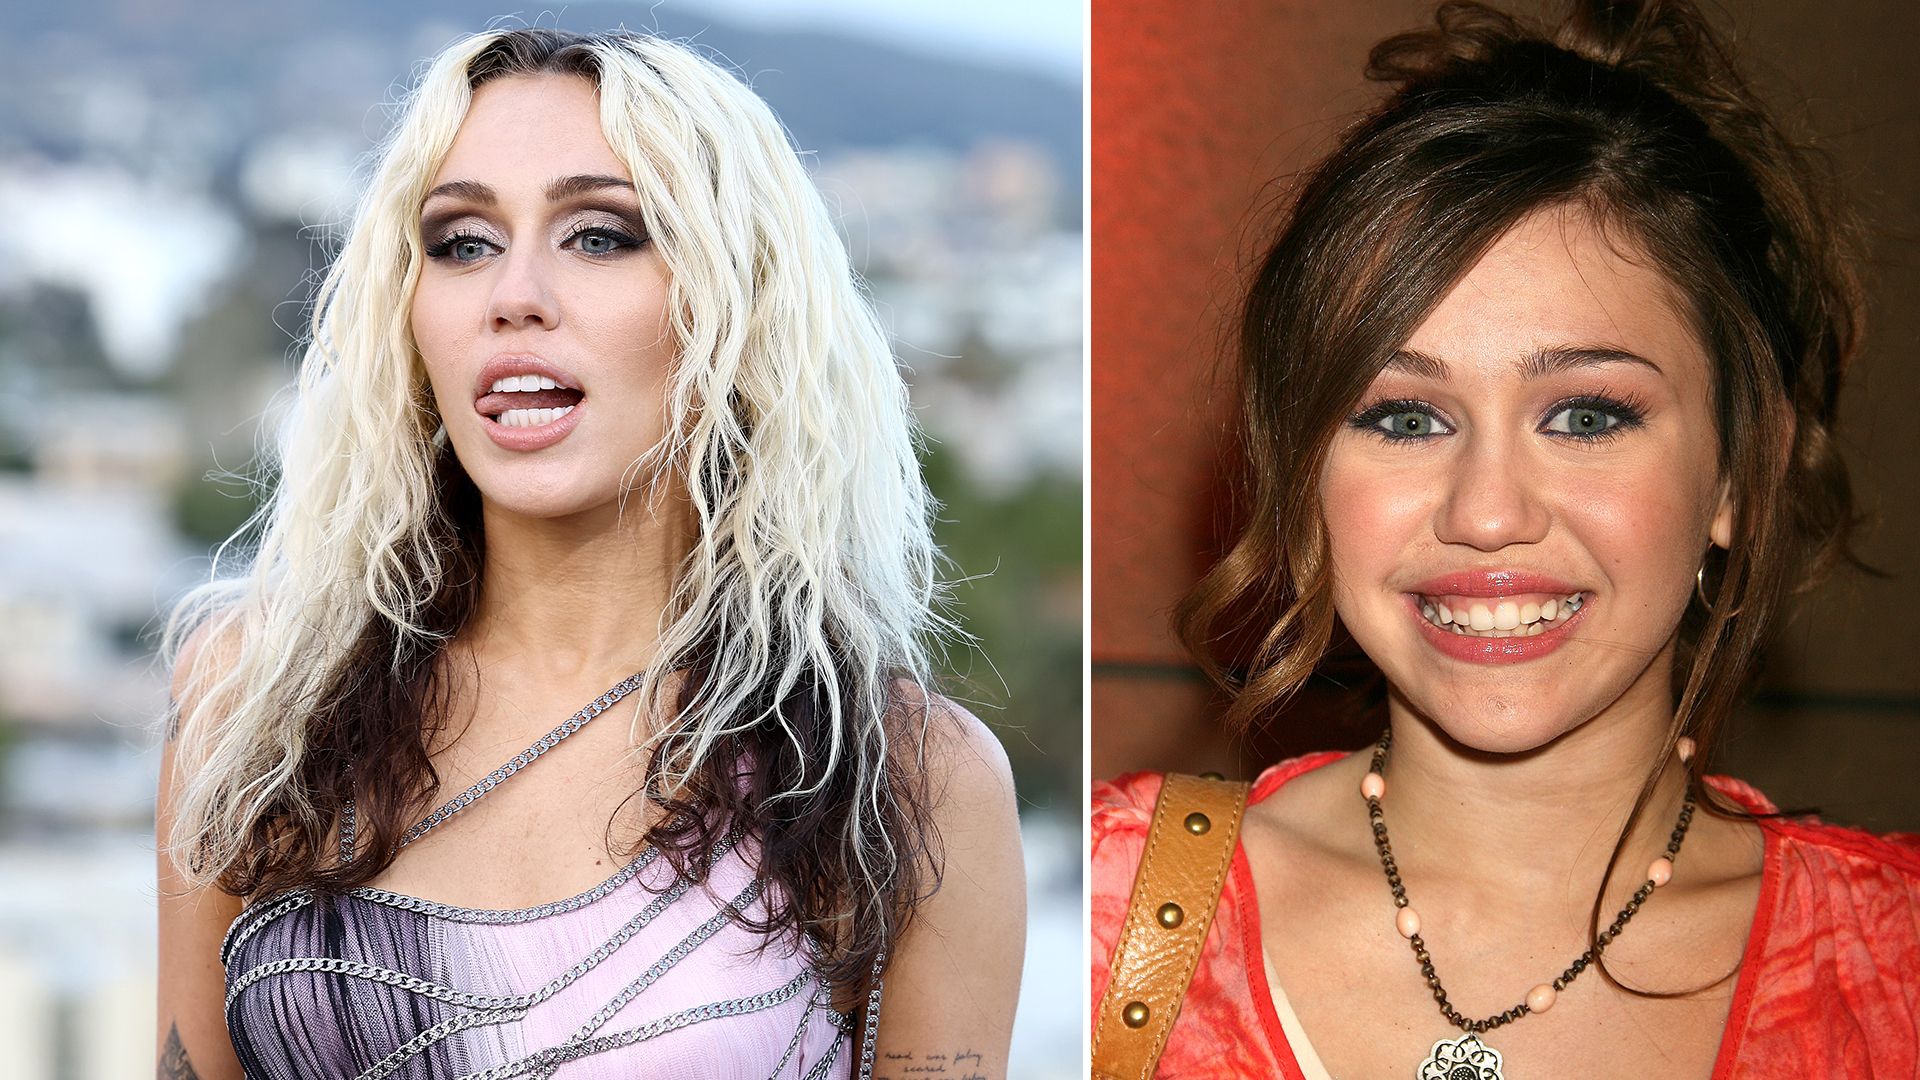 Miley Cyrus before and after her smile makeover